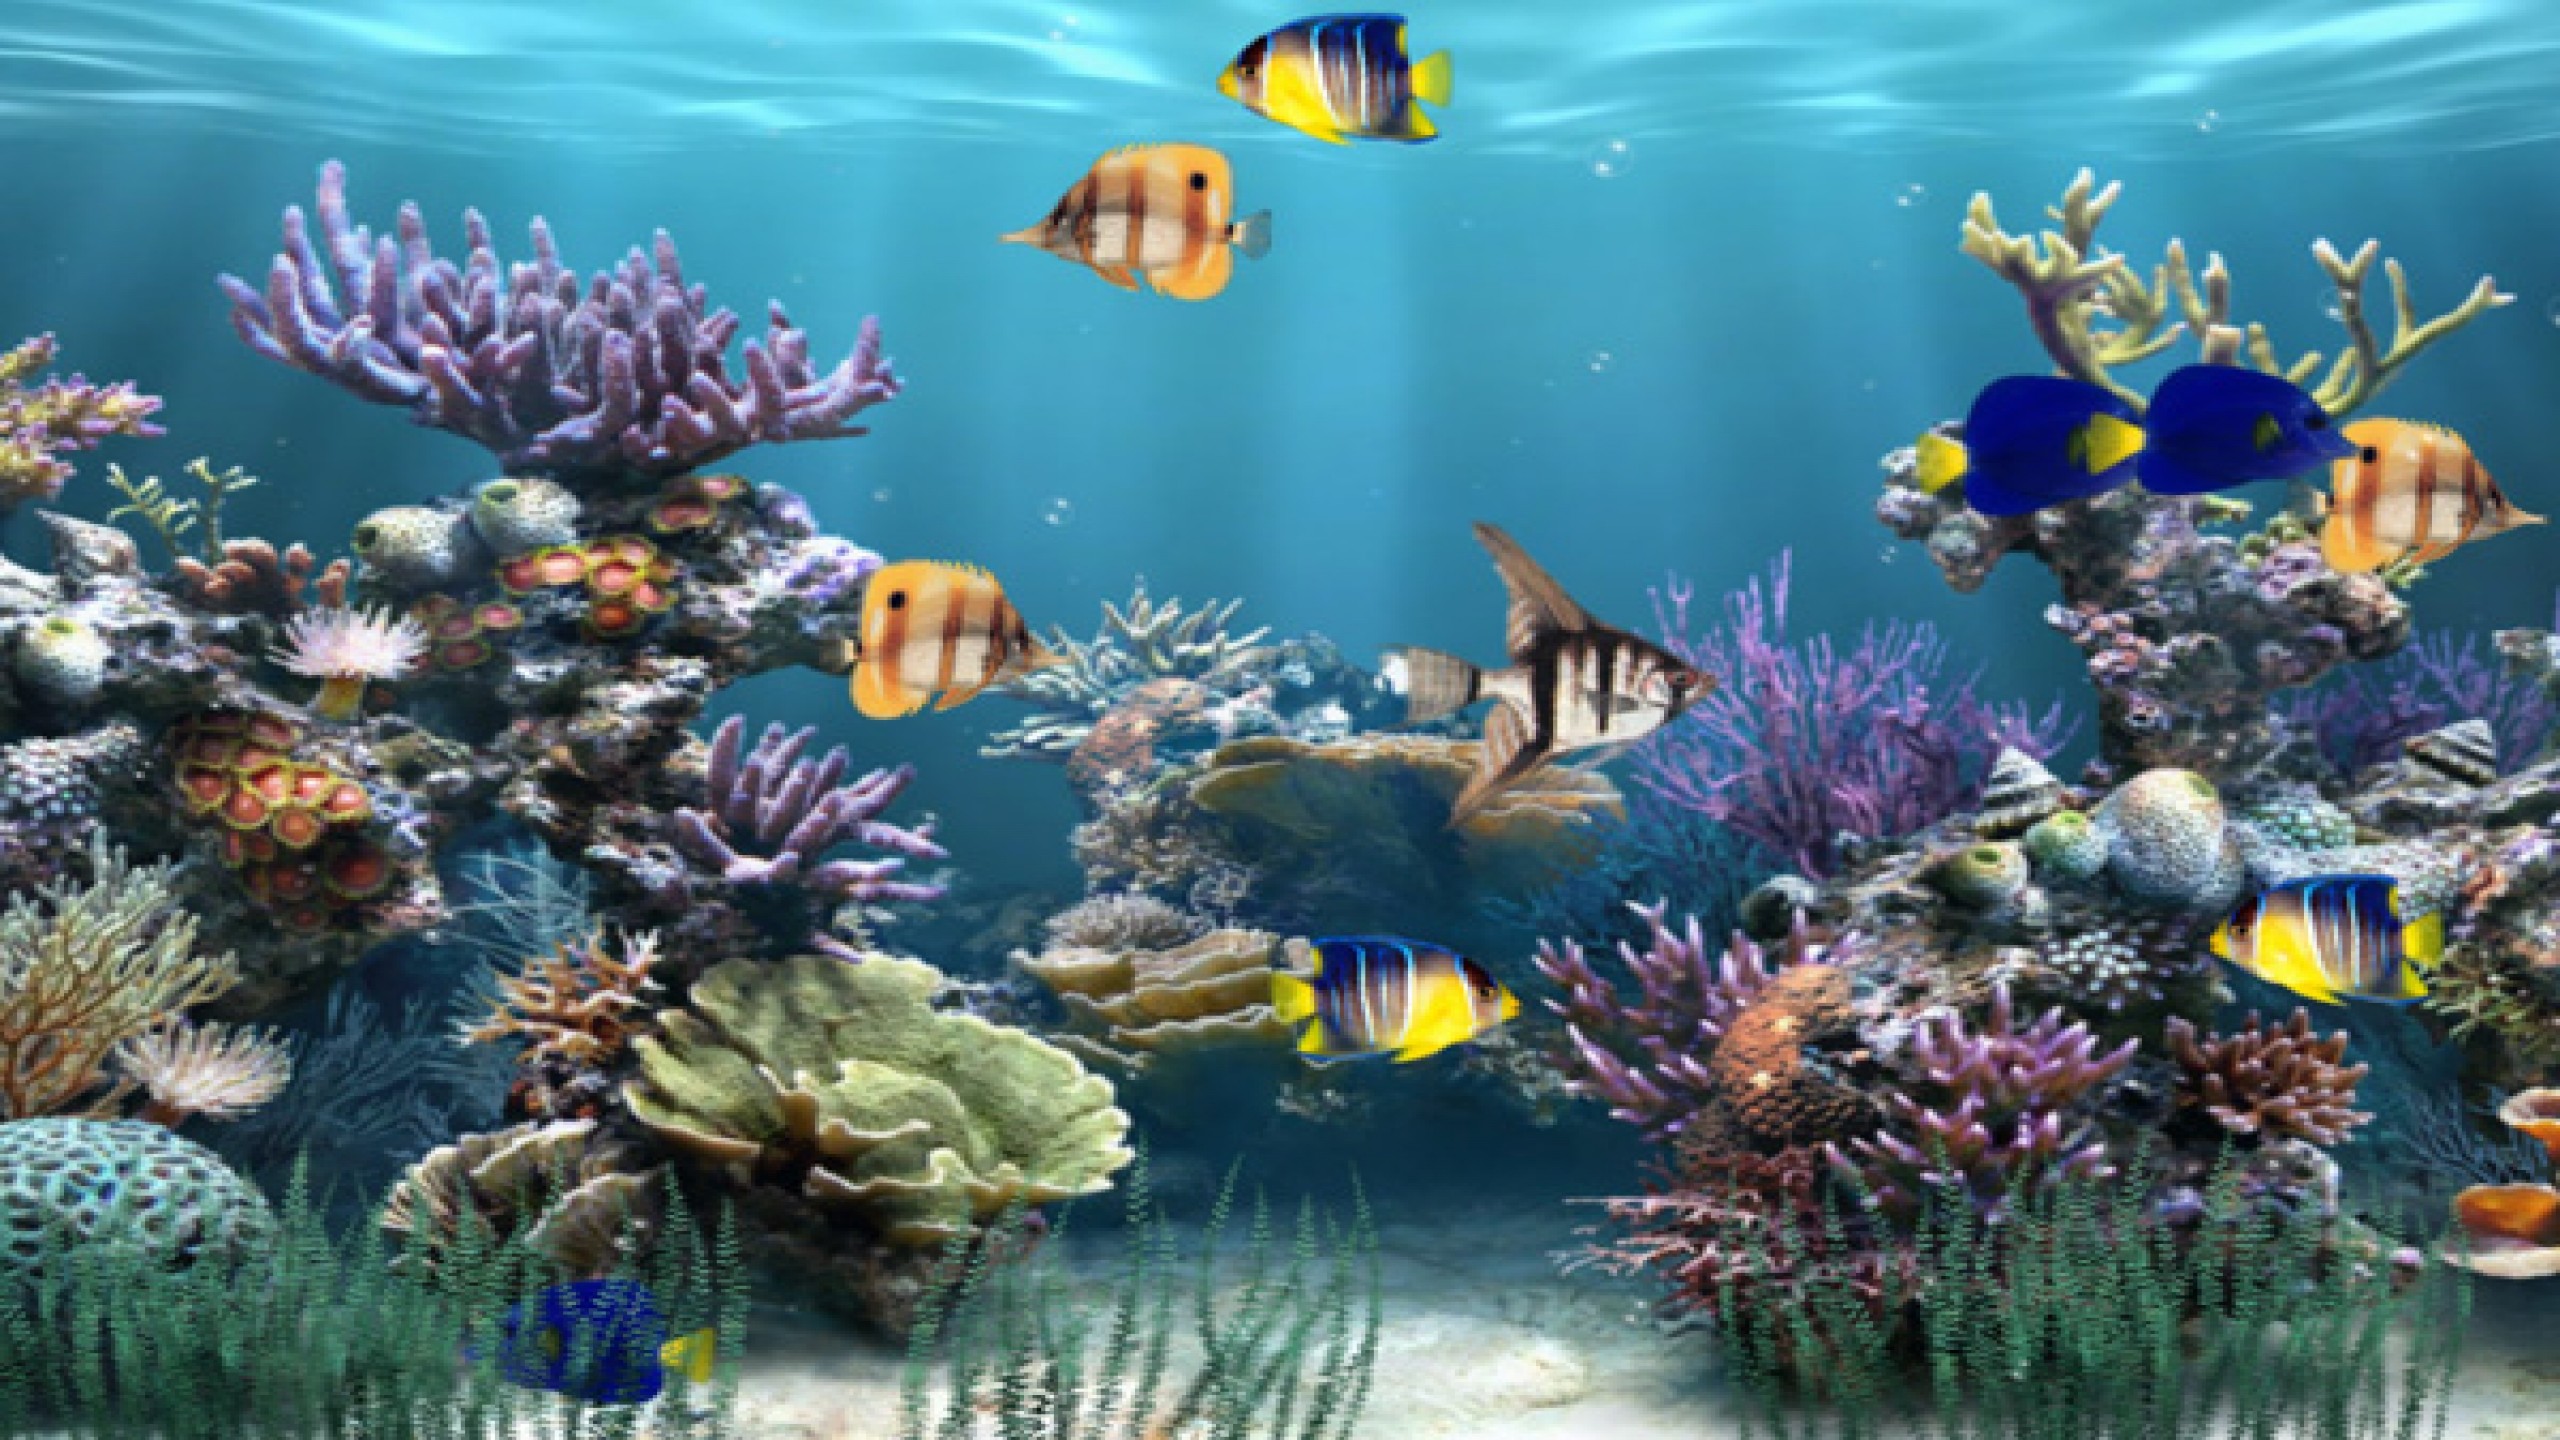 animated moving wallpapers for desktop free download,coral reef,reef,marine biology,coral reef fish,stony coral